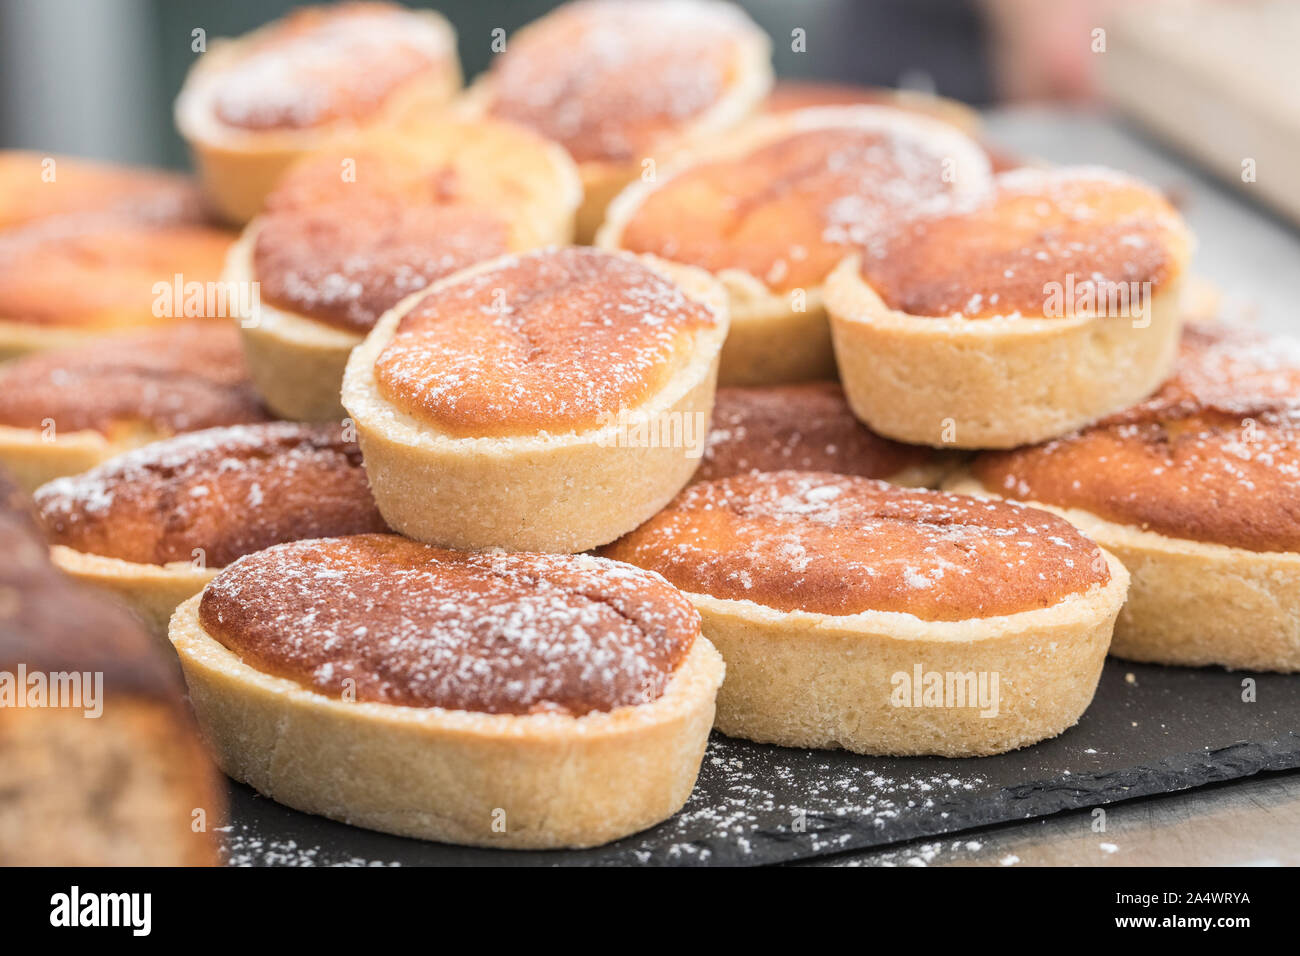 Swedish traditional pie mazarin tart filled with almond paste. The tarts are piled up on a black background and are sprinkled with icing sugar. Stock Photo